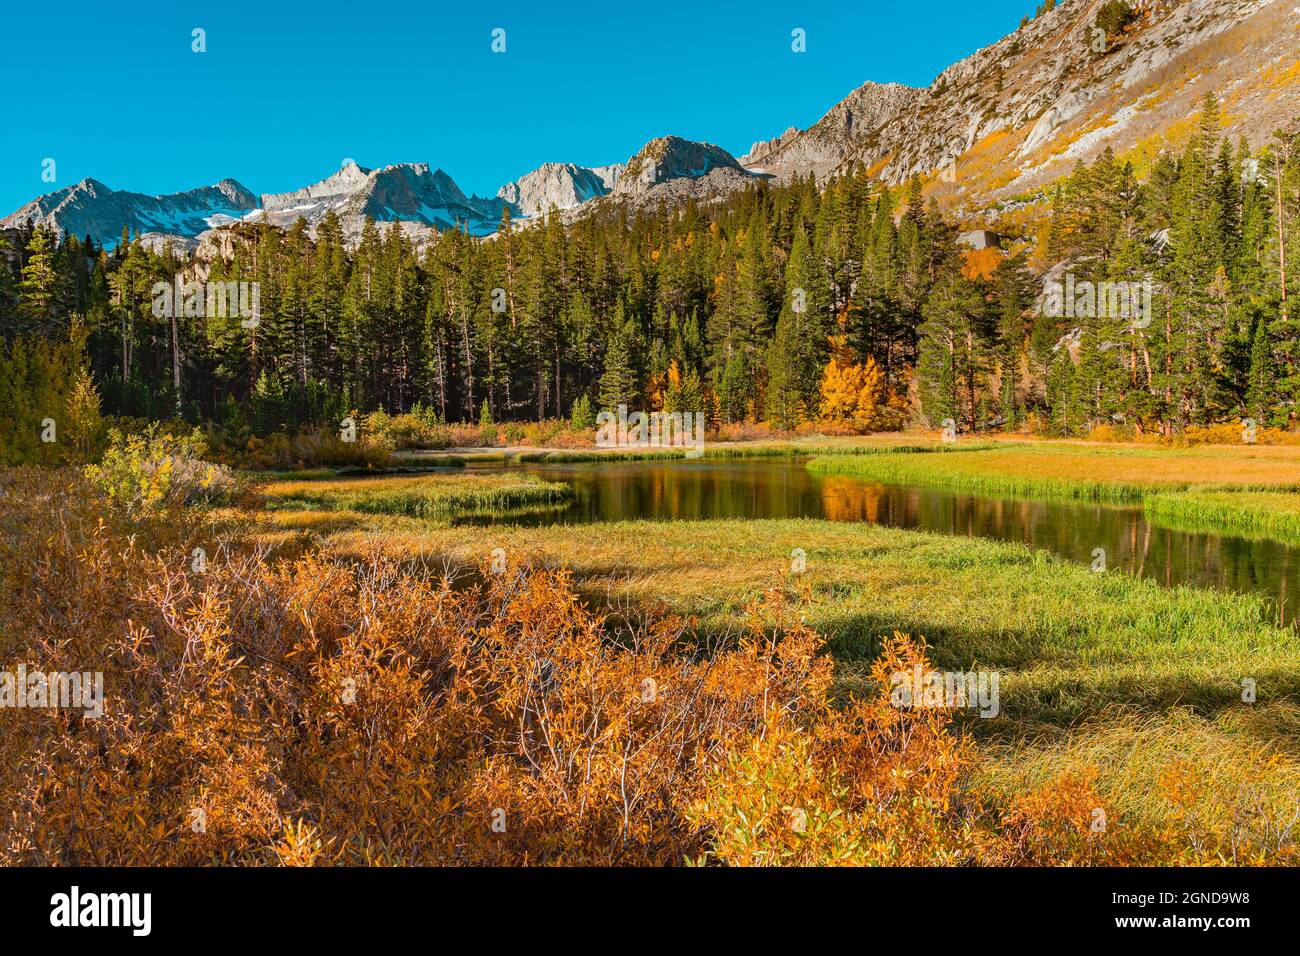 A fishing pond is surrounded by the Sierra Mountains and fall color and a meadow filled with evergreen trees in Central California. Stock Photo